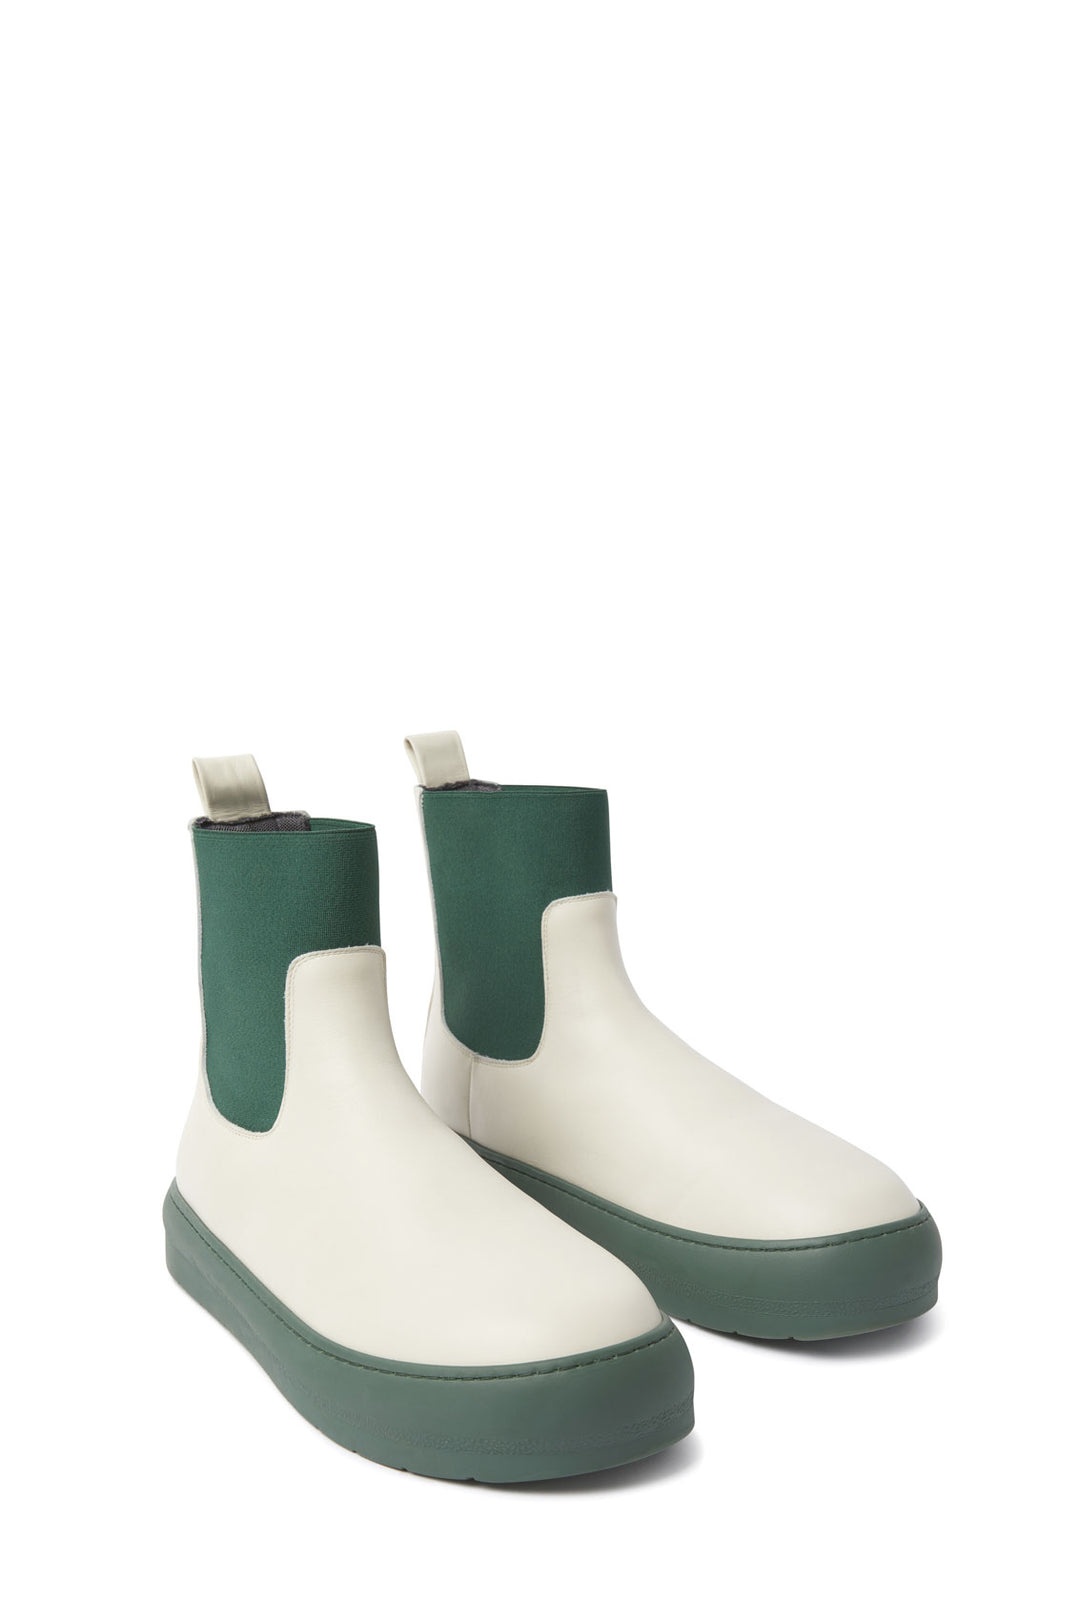 DREAMY ANKLE BOOTS / leather / cream & green - 1